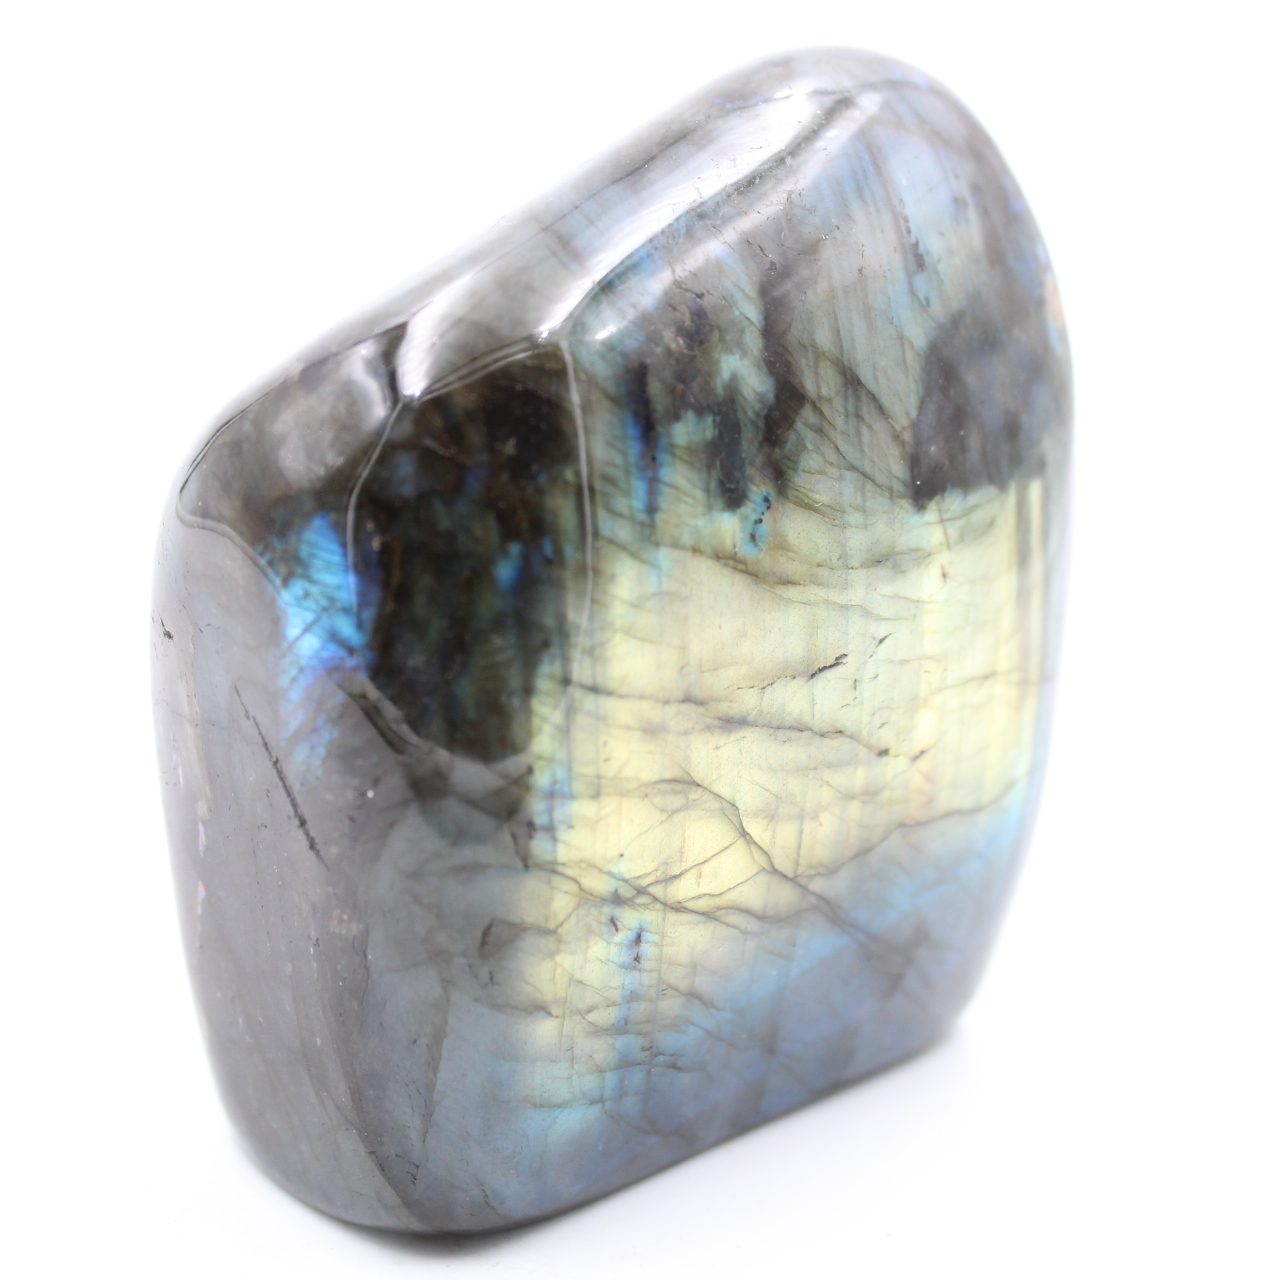 Labradorite with yellow reflections polished free form